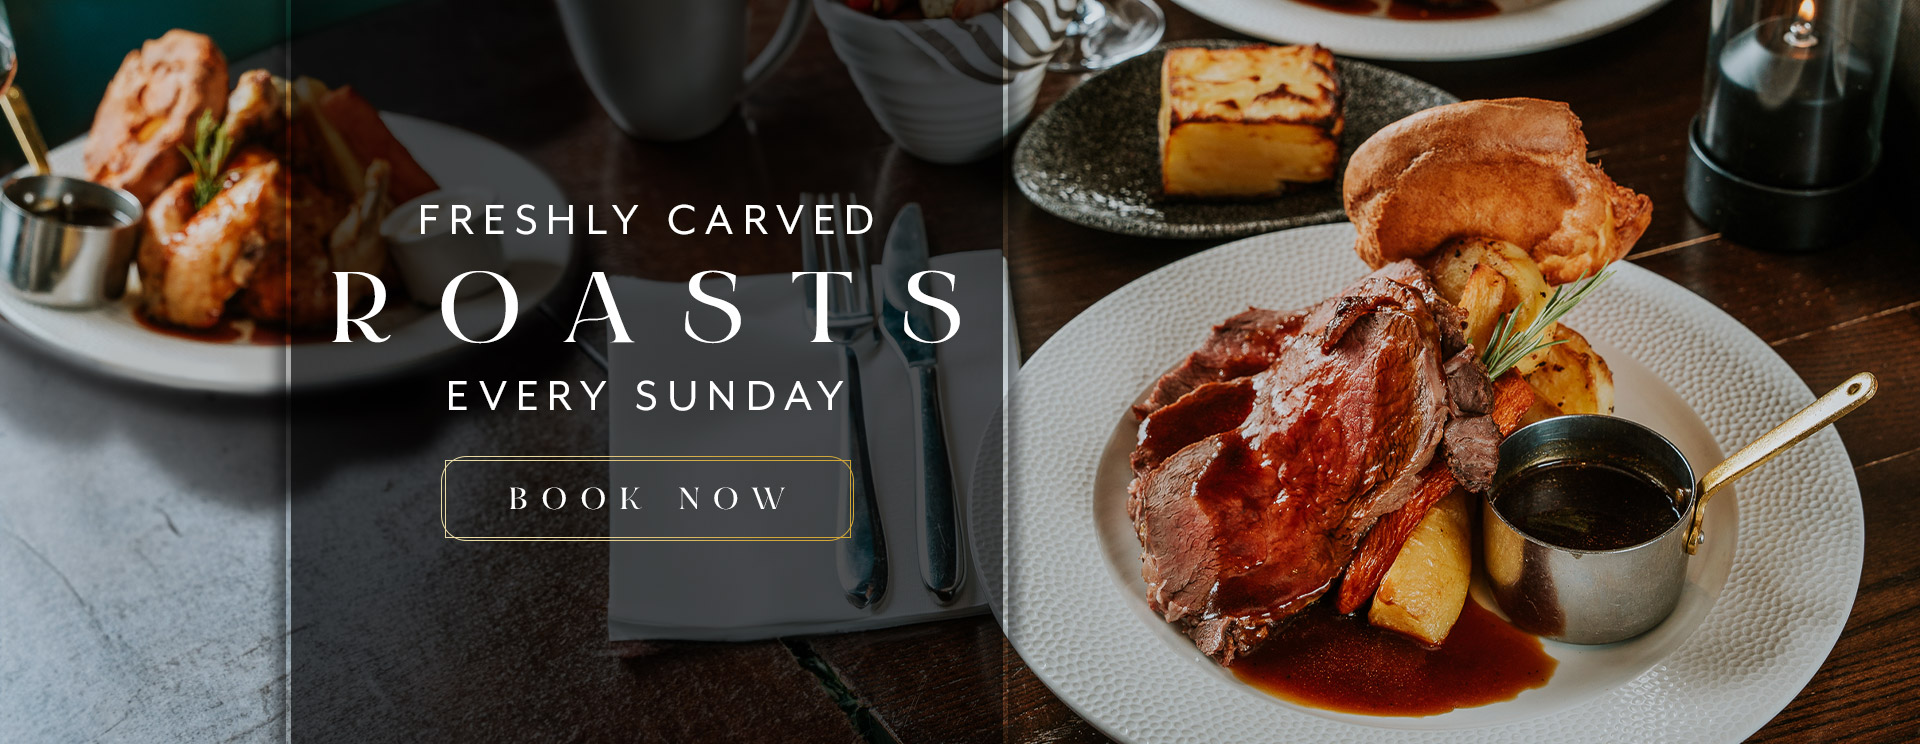 Sunday Lunch at The Plough & Harrow